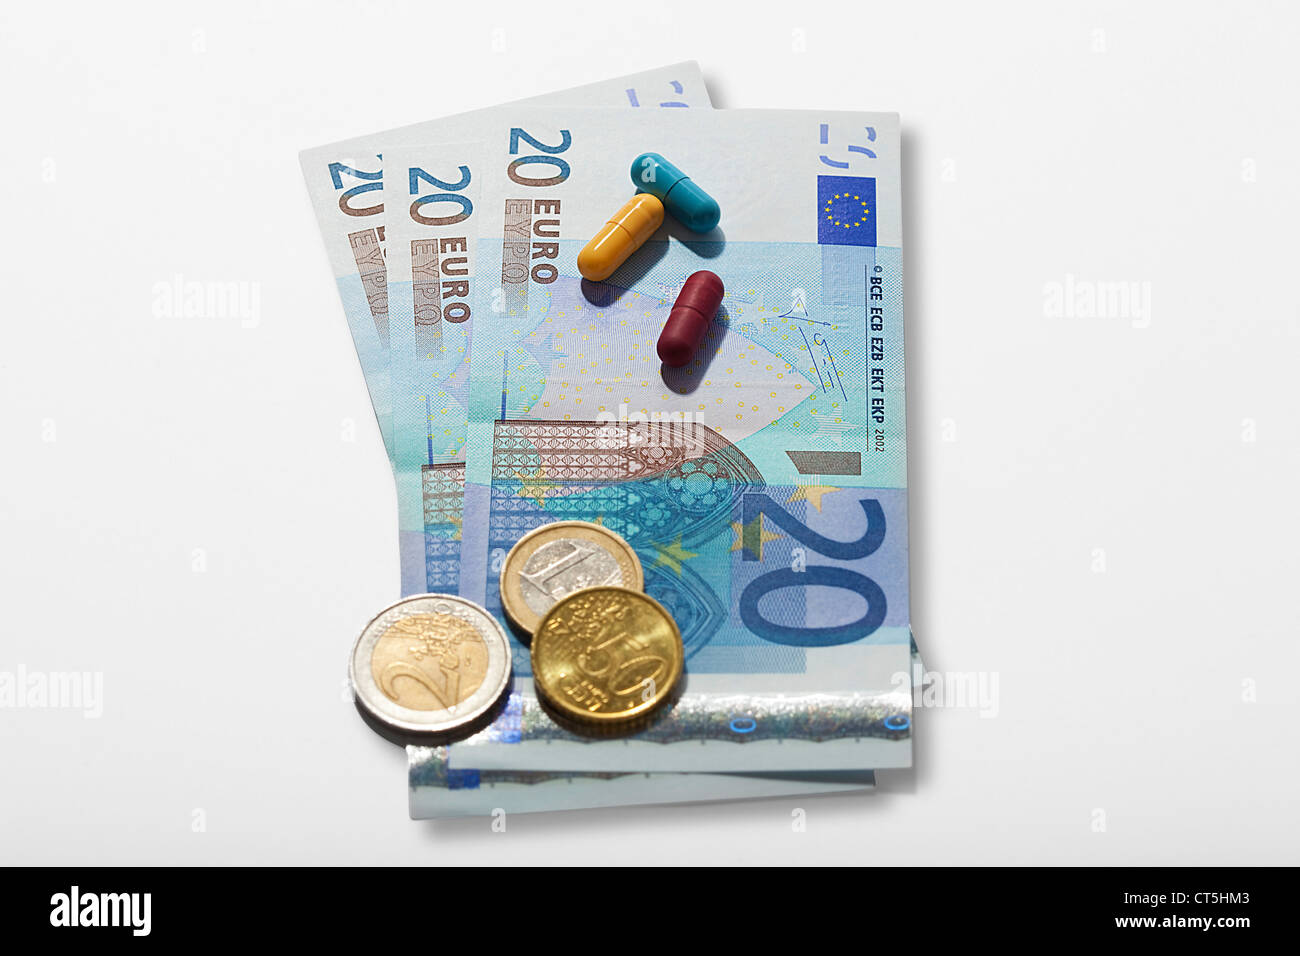 COST OF DRUGS Stock Photo